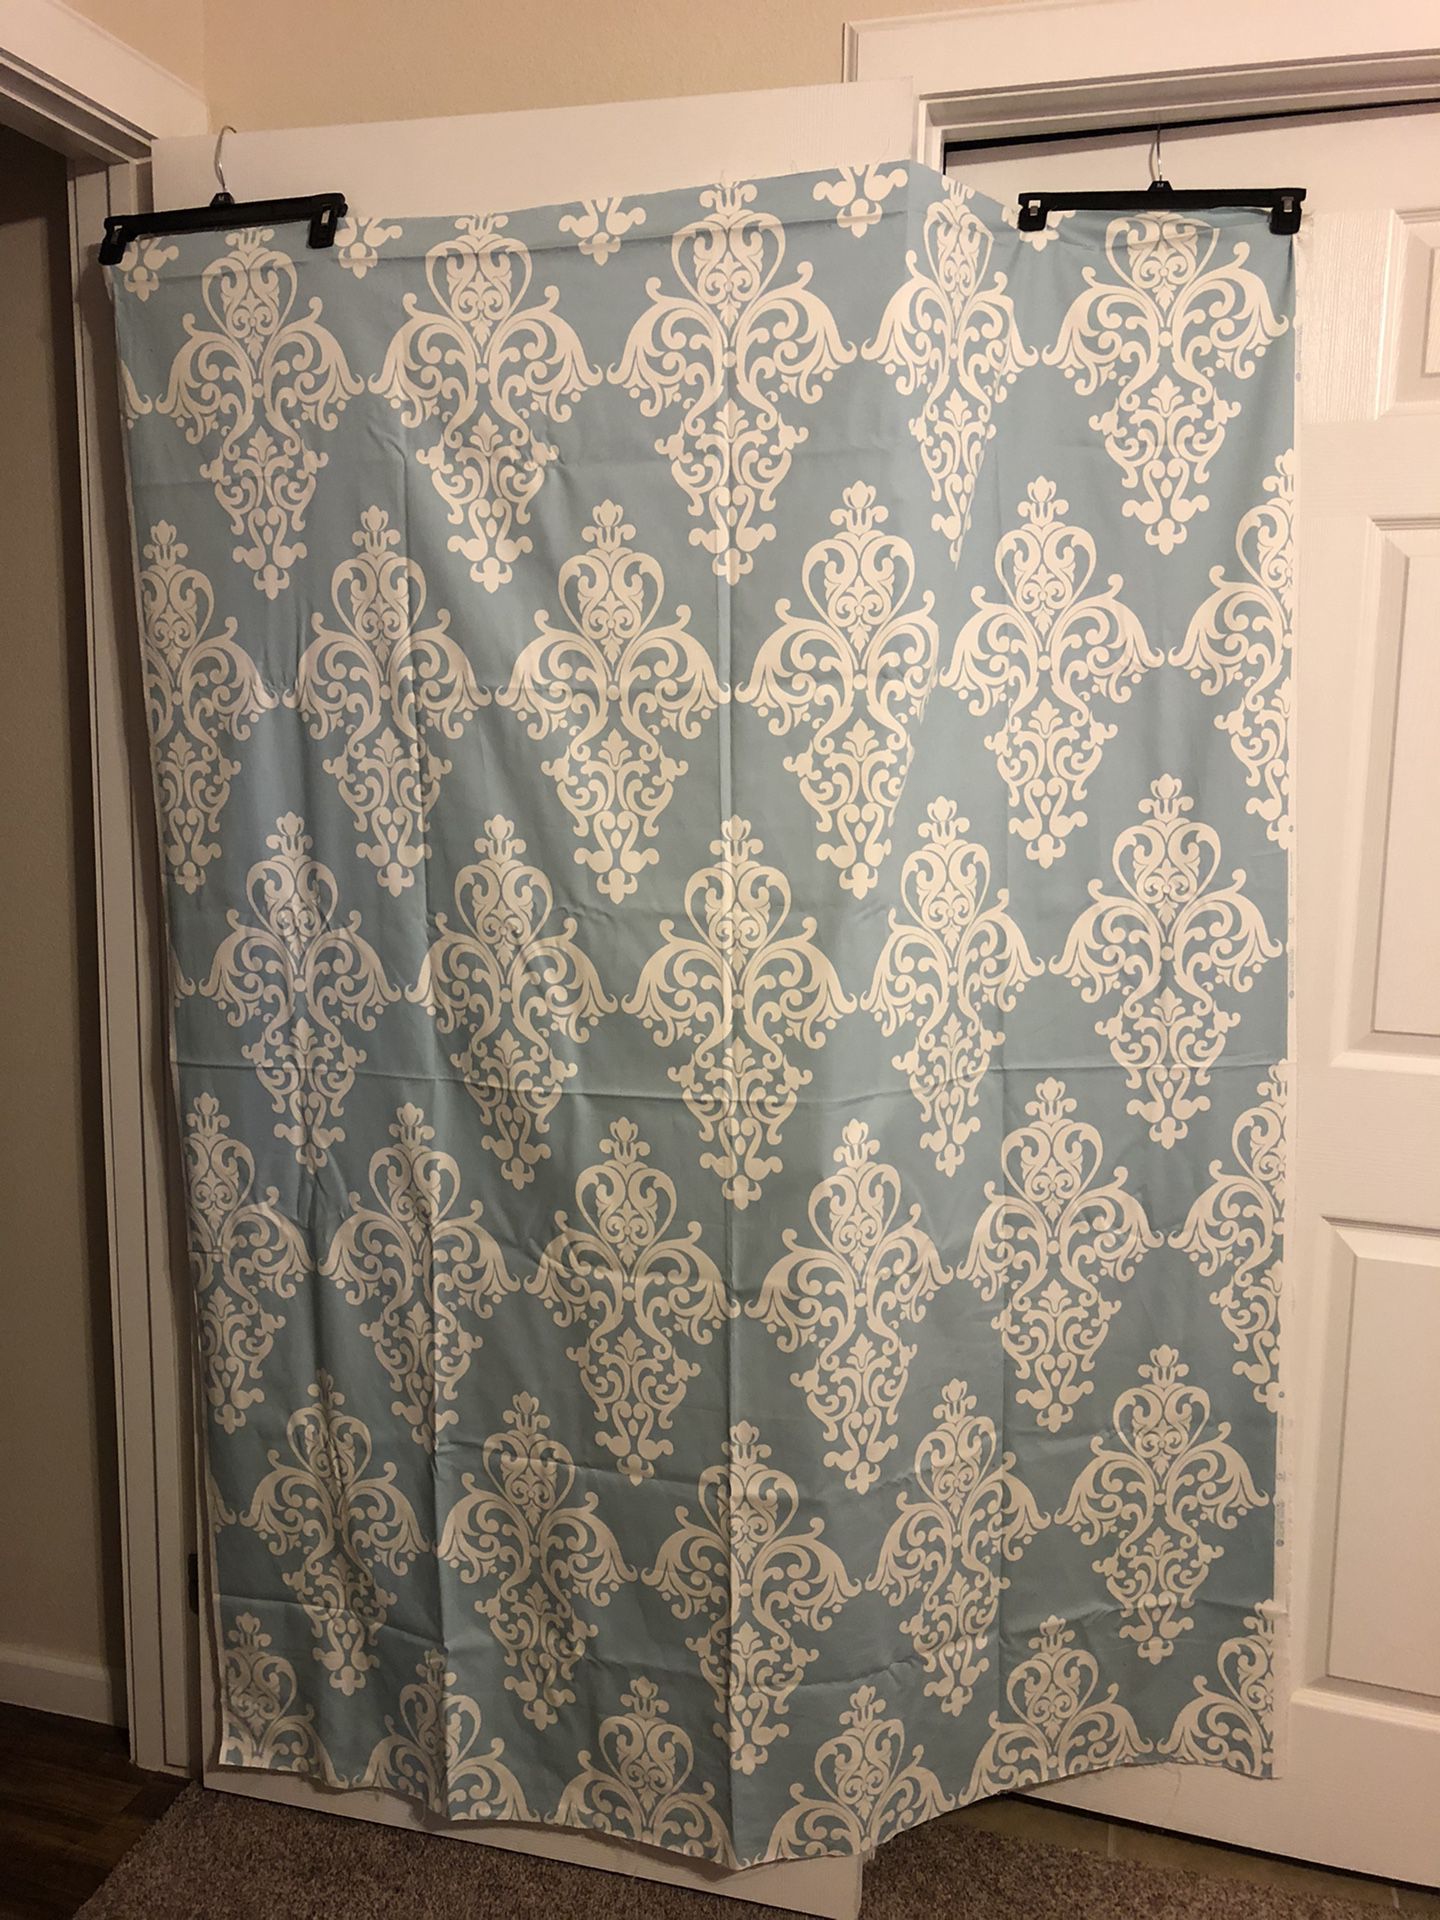 New, never used Light blue & white fabric. No stains. Asking $4